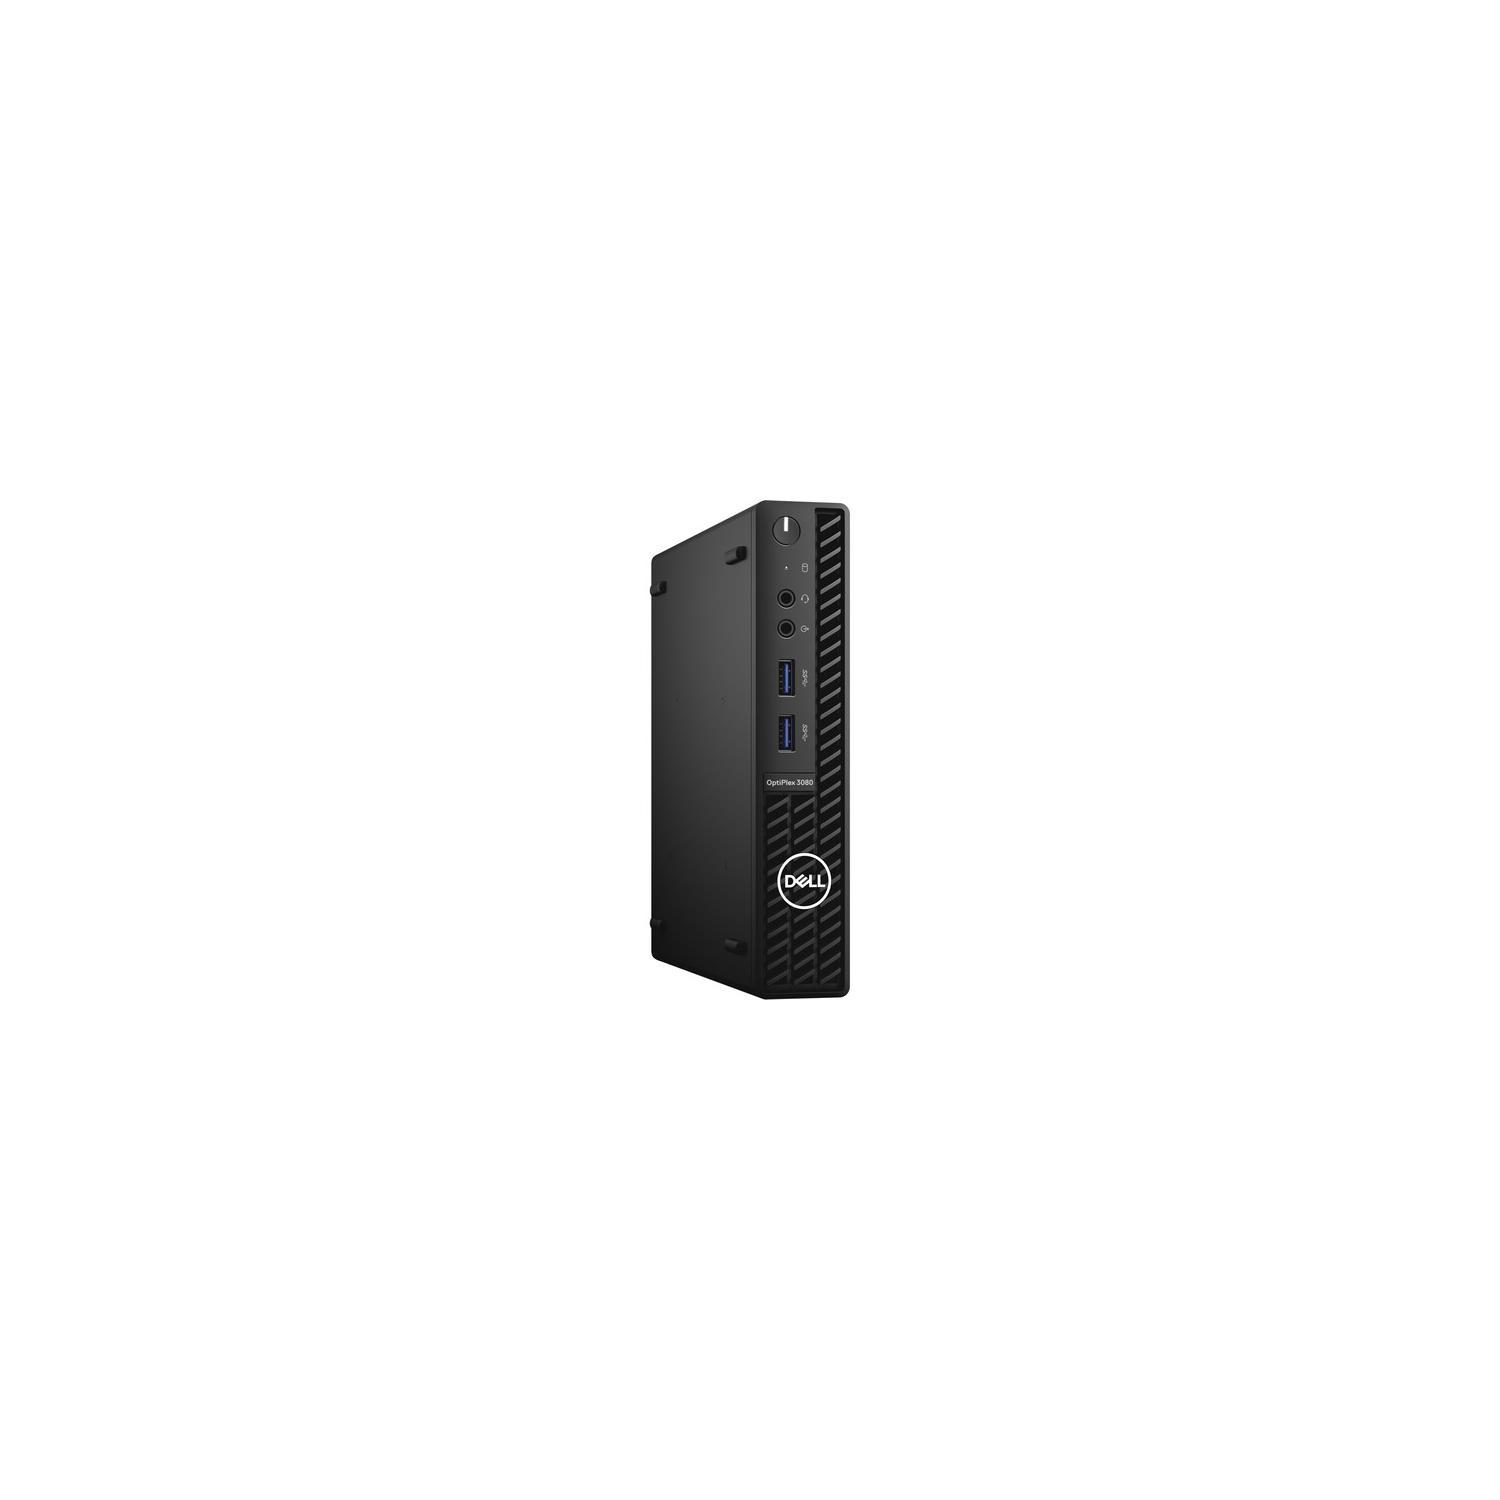 Refurbished (Excellent) - Dell OptiPlex 3000 3080 Micro Tower Desktop (2020) | Core i5 - 256GB SSD - 8GB RAM | 6 Cores @ 3.8 GHz - 10th Gen CPU Certified Refurbished